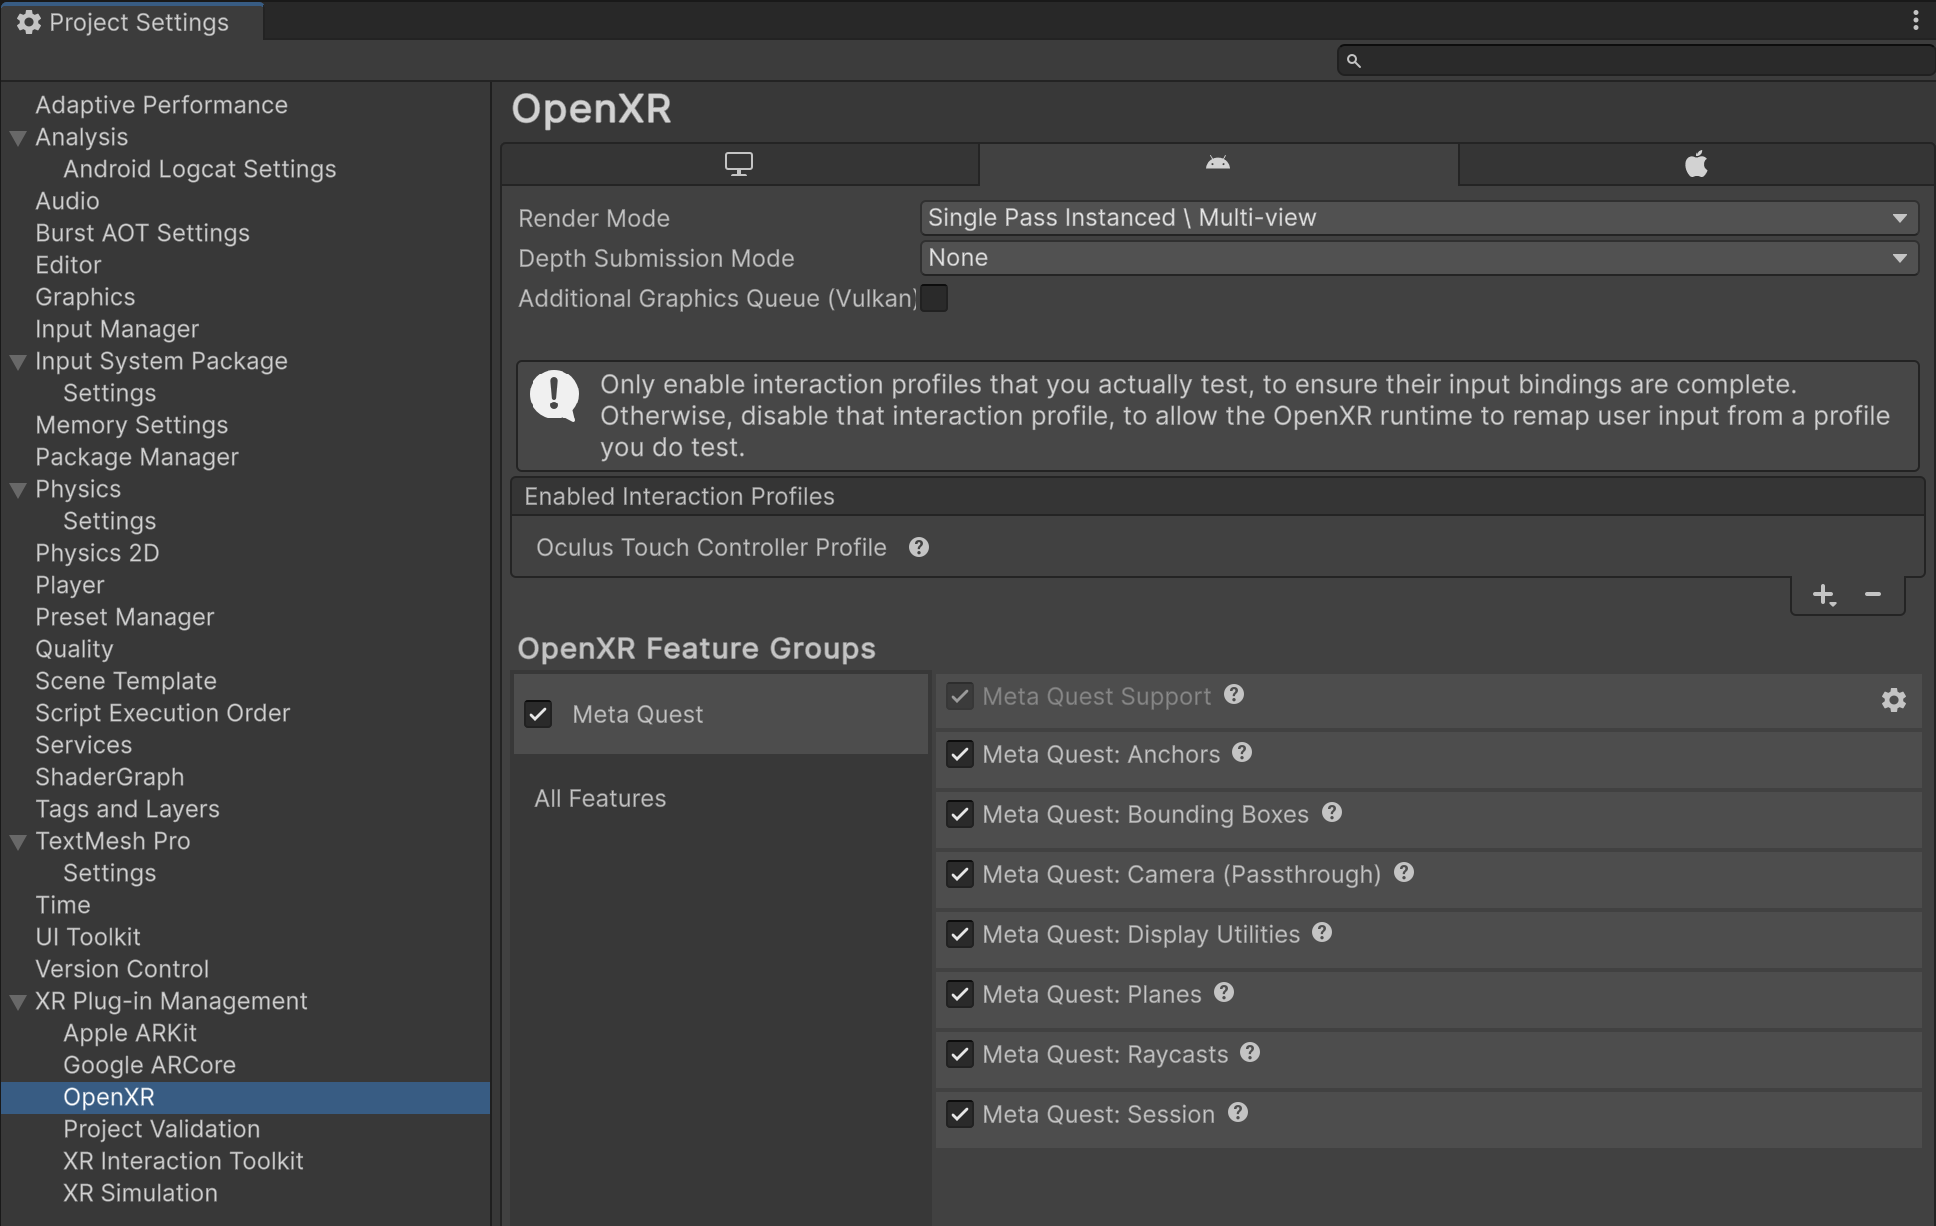 Unity's Project Settings window is open to XR Plug-in Management > OpenXR, showing a list of enabled features in the Meta Quest feature group